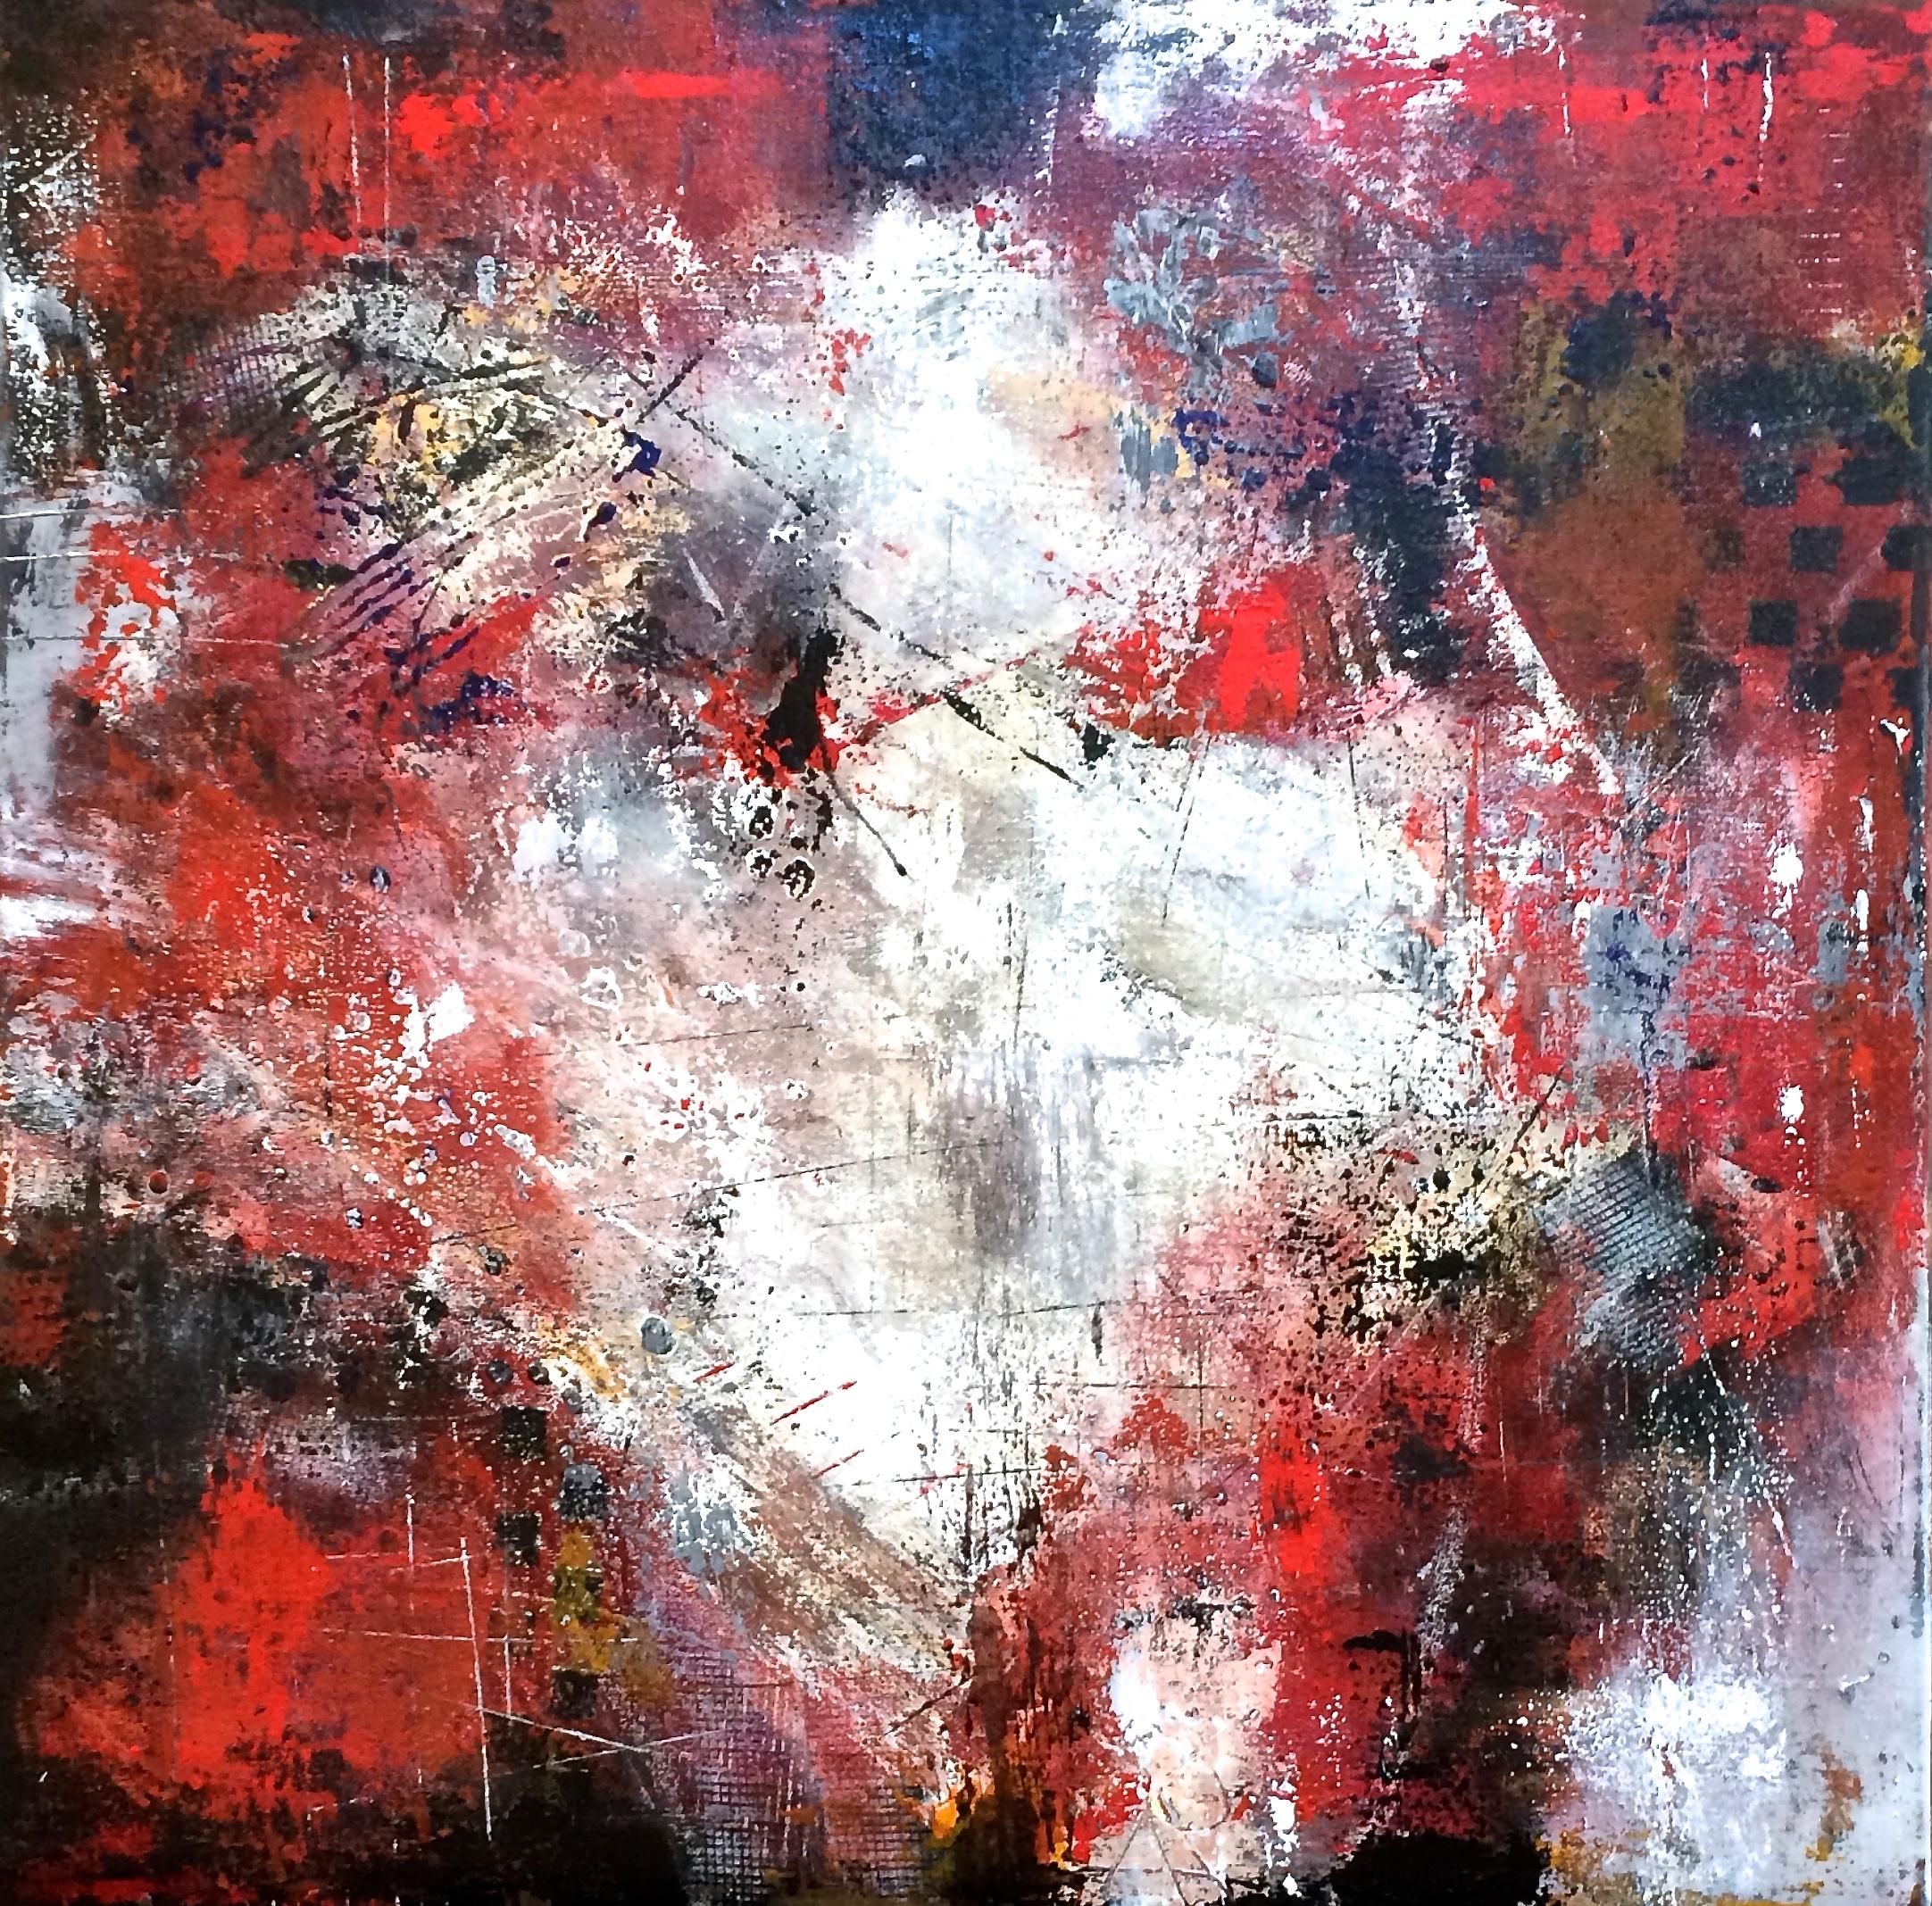 DL Watson Abstract Painting - I See the Red Door, Painting, Acrylic on Canvas